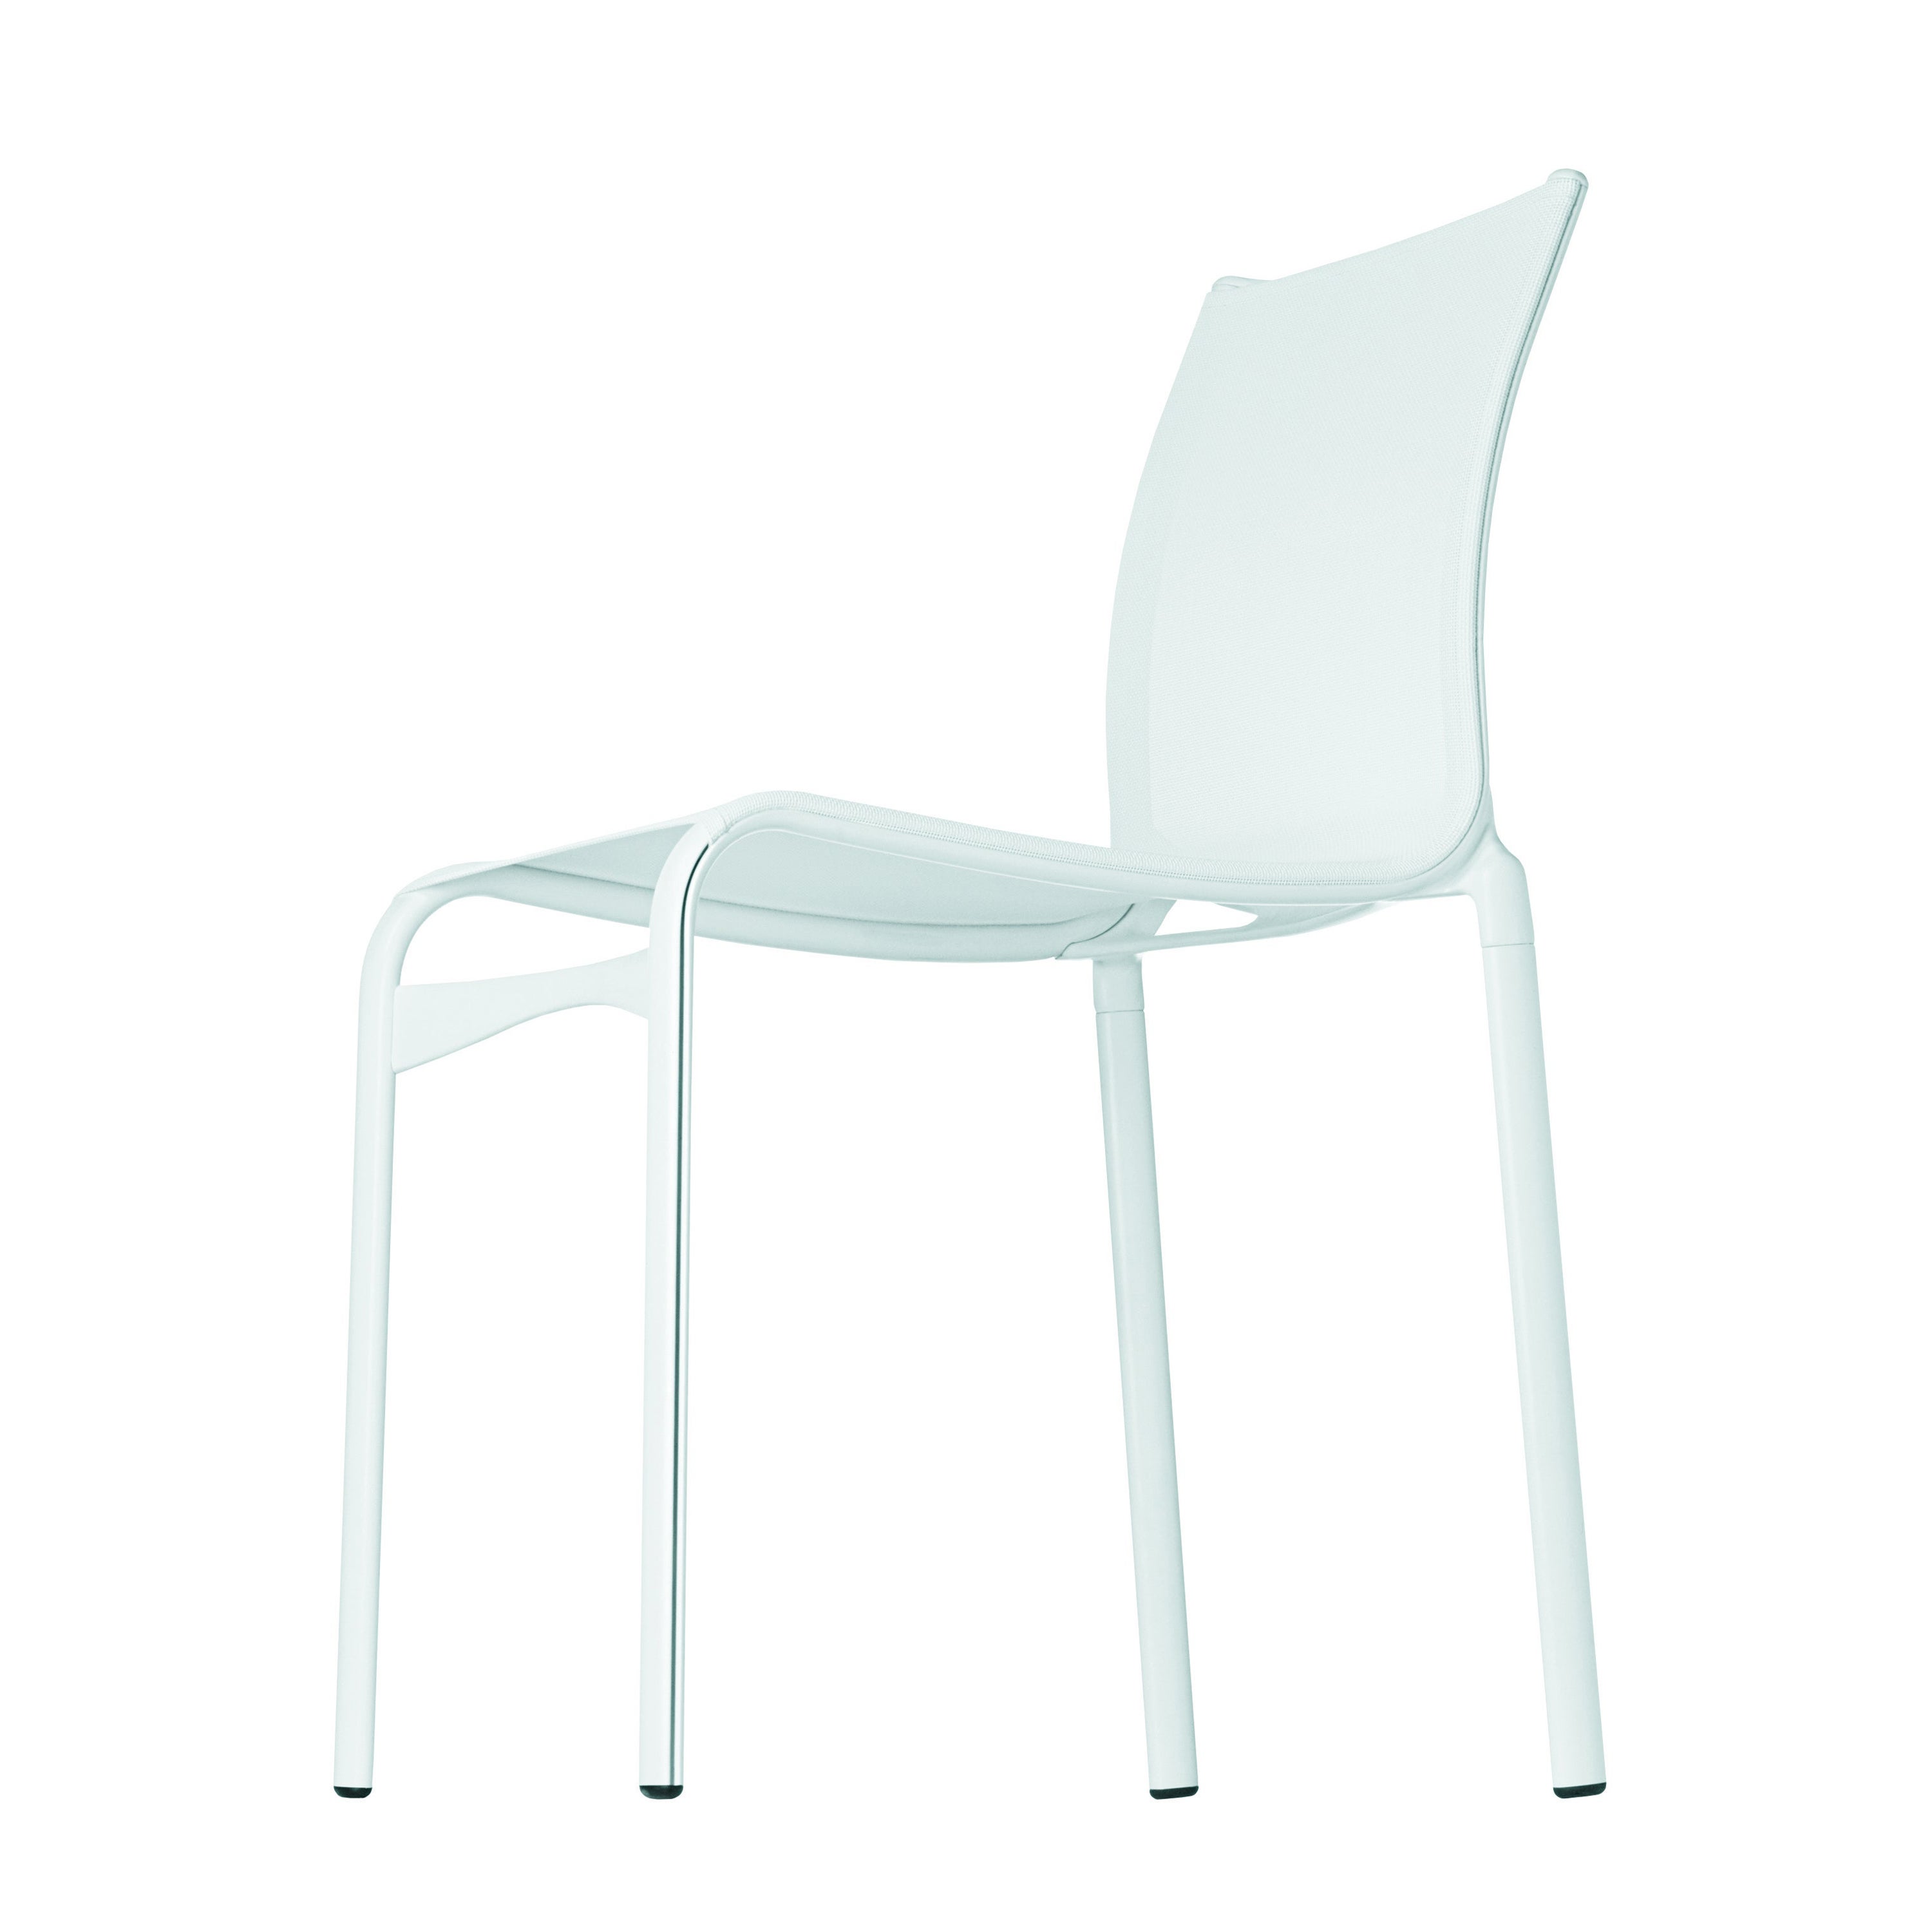 Alias Highframe 40 Chair in White Mesh with Lacquered Aluminium Frame